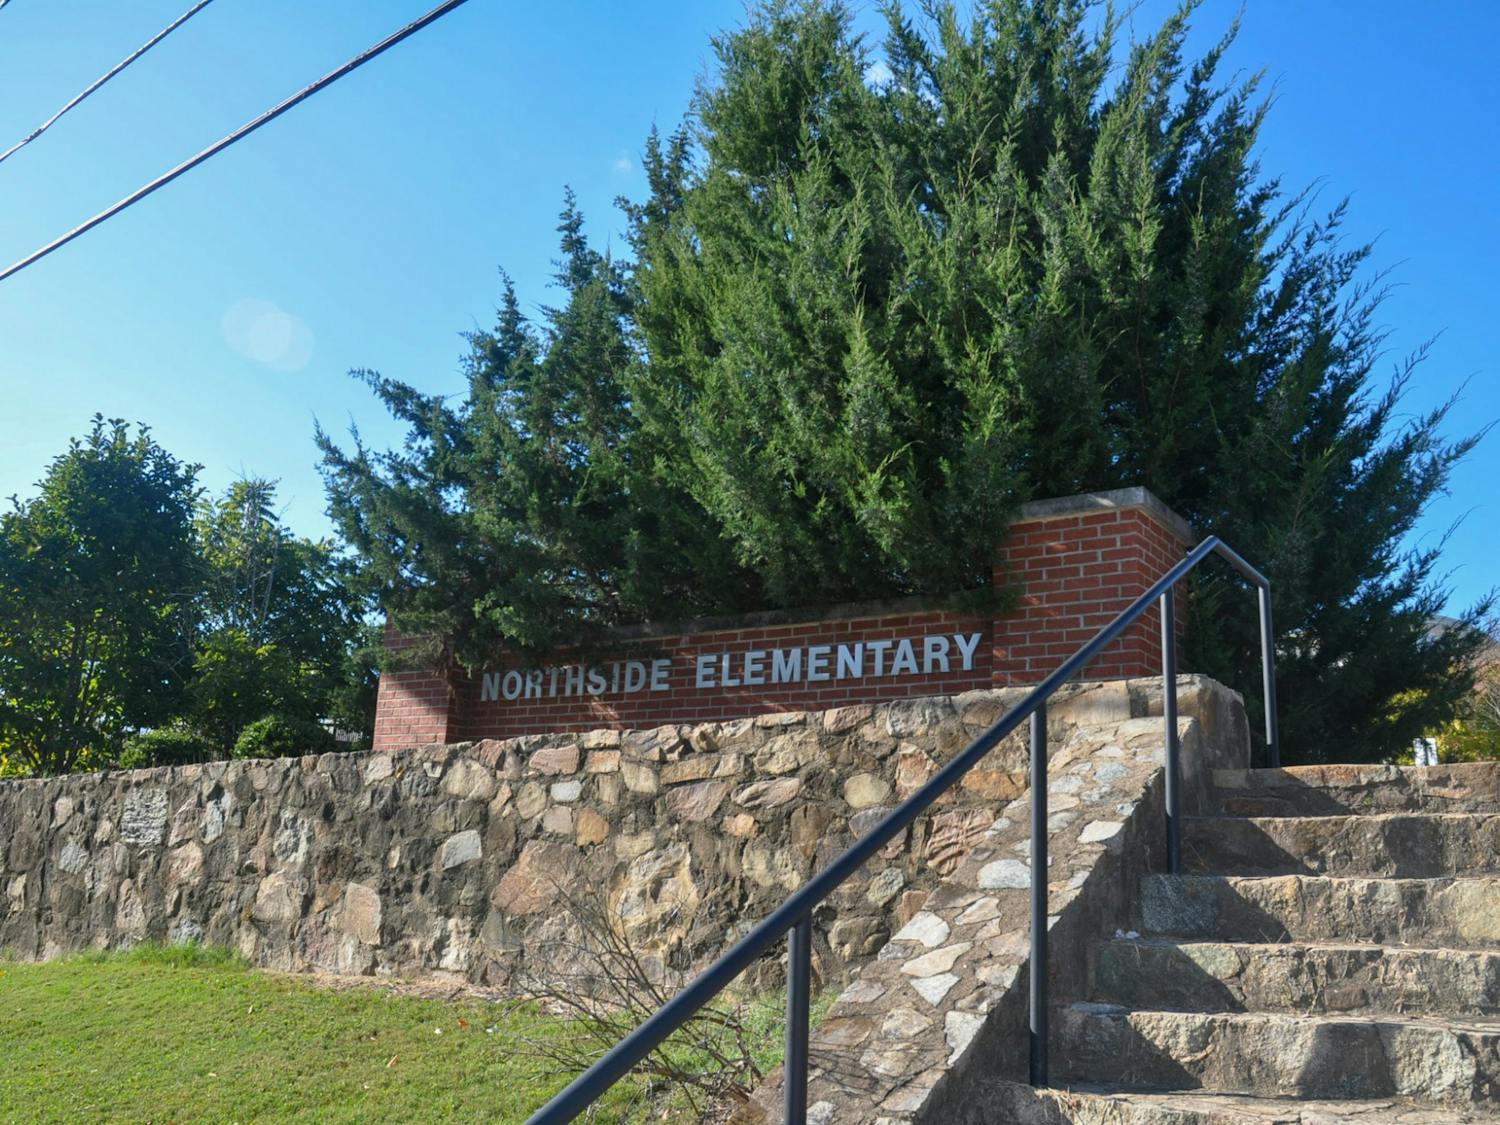 Northside Elementary School stands on Oct. 17. This is one of the CHCCS schoolswhose employees will have an extended deadline to get vaccinated.&nbsp;